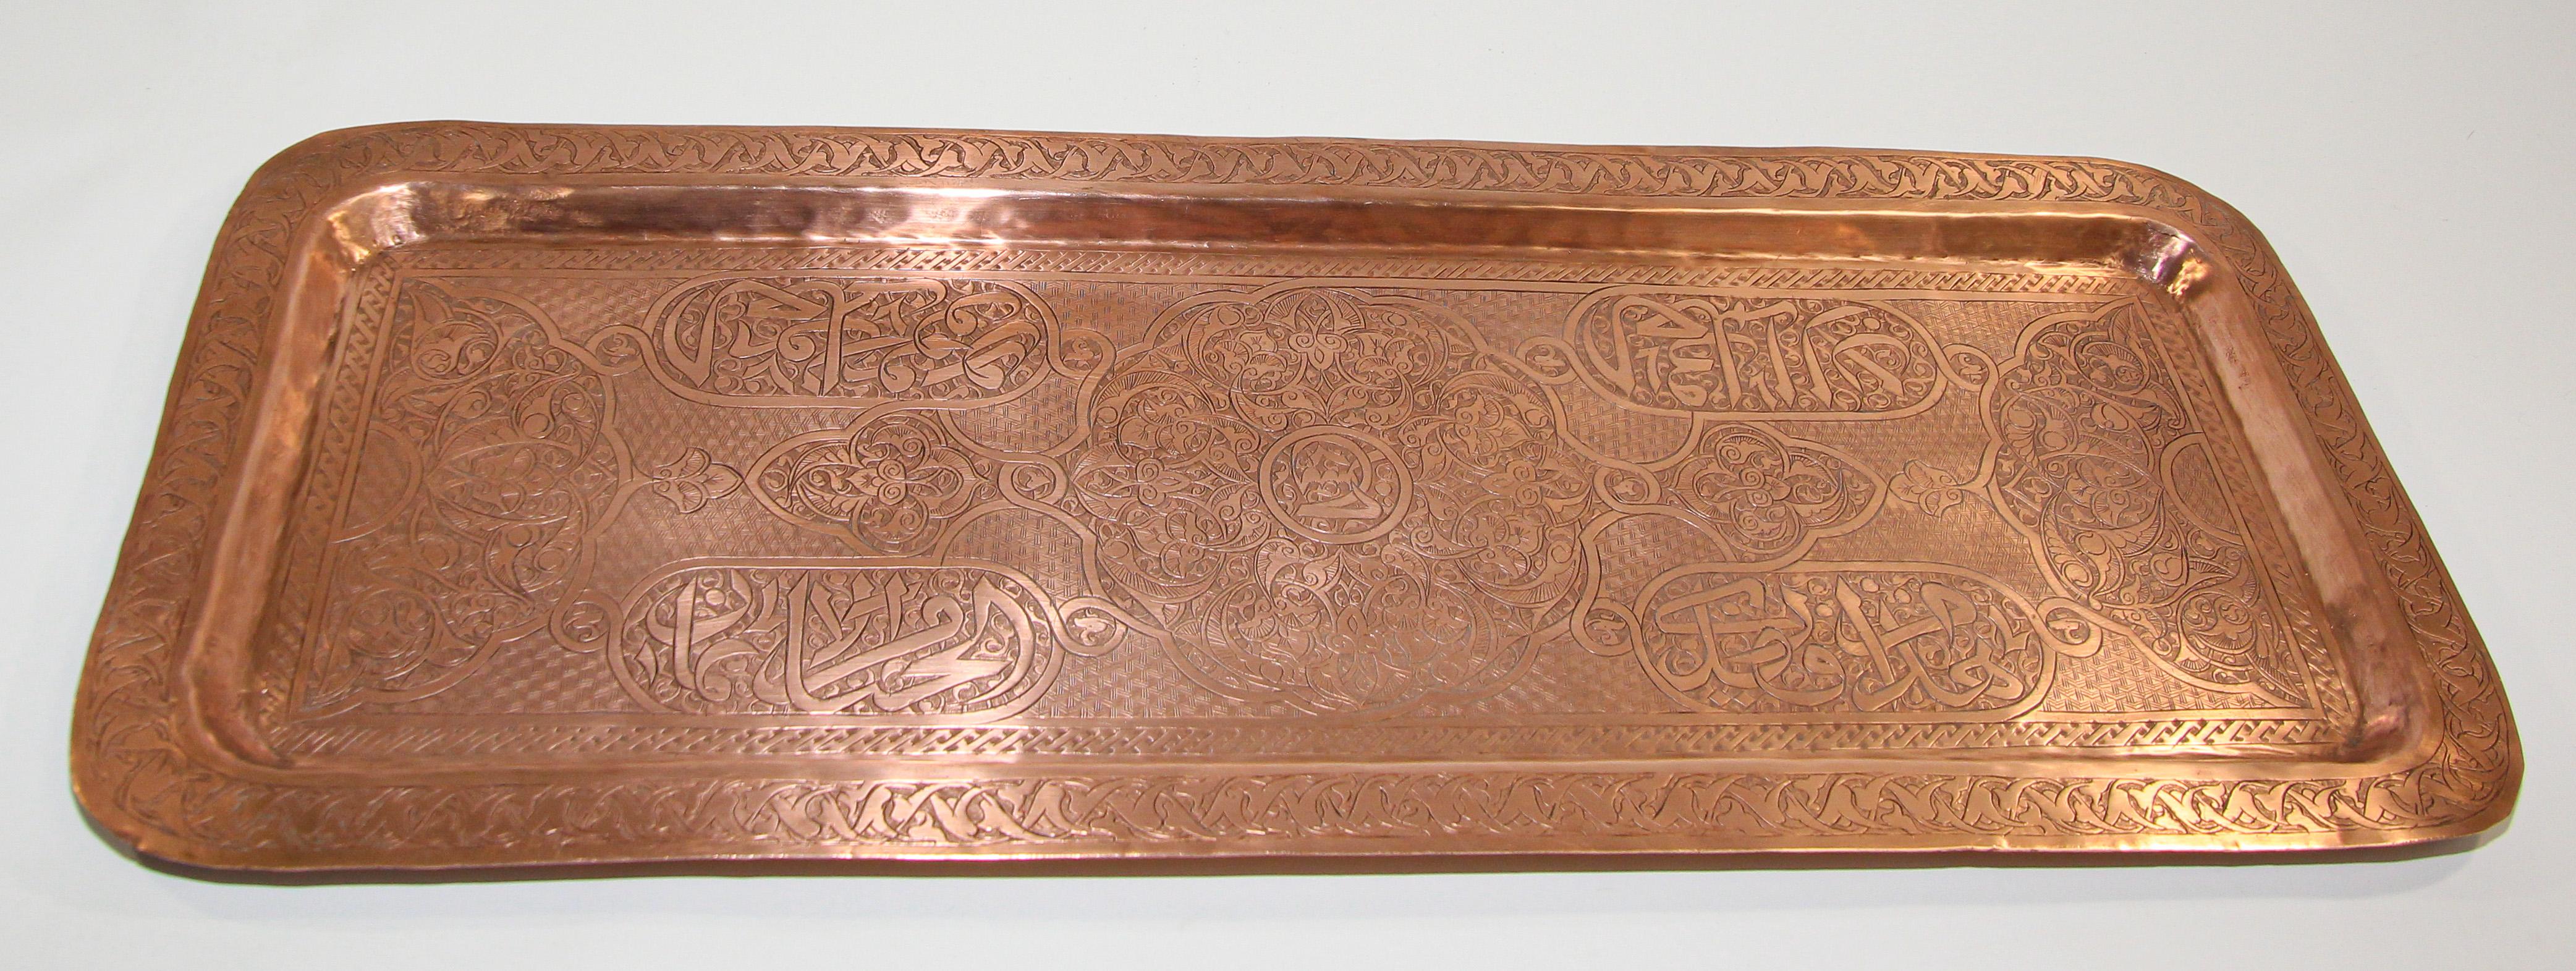 Antique Indo Persian Copper Charger Serving Tray In Good Condition For Sale In North Hollywood, CA